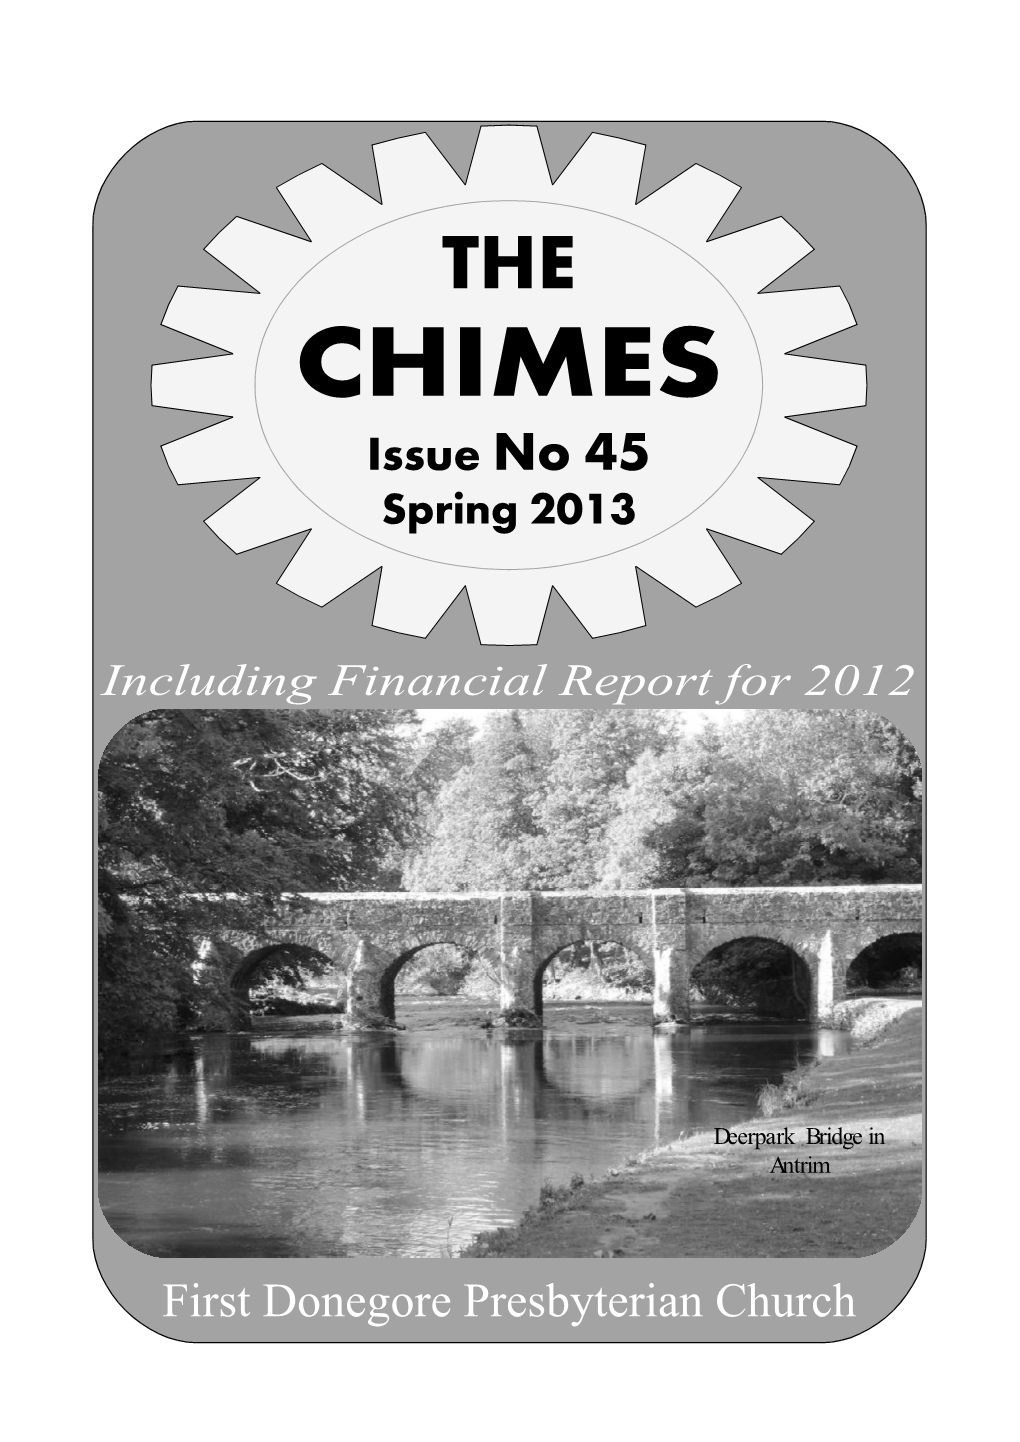 CHIMES Issue No 45 Spring 2013